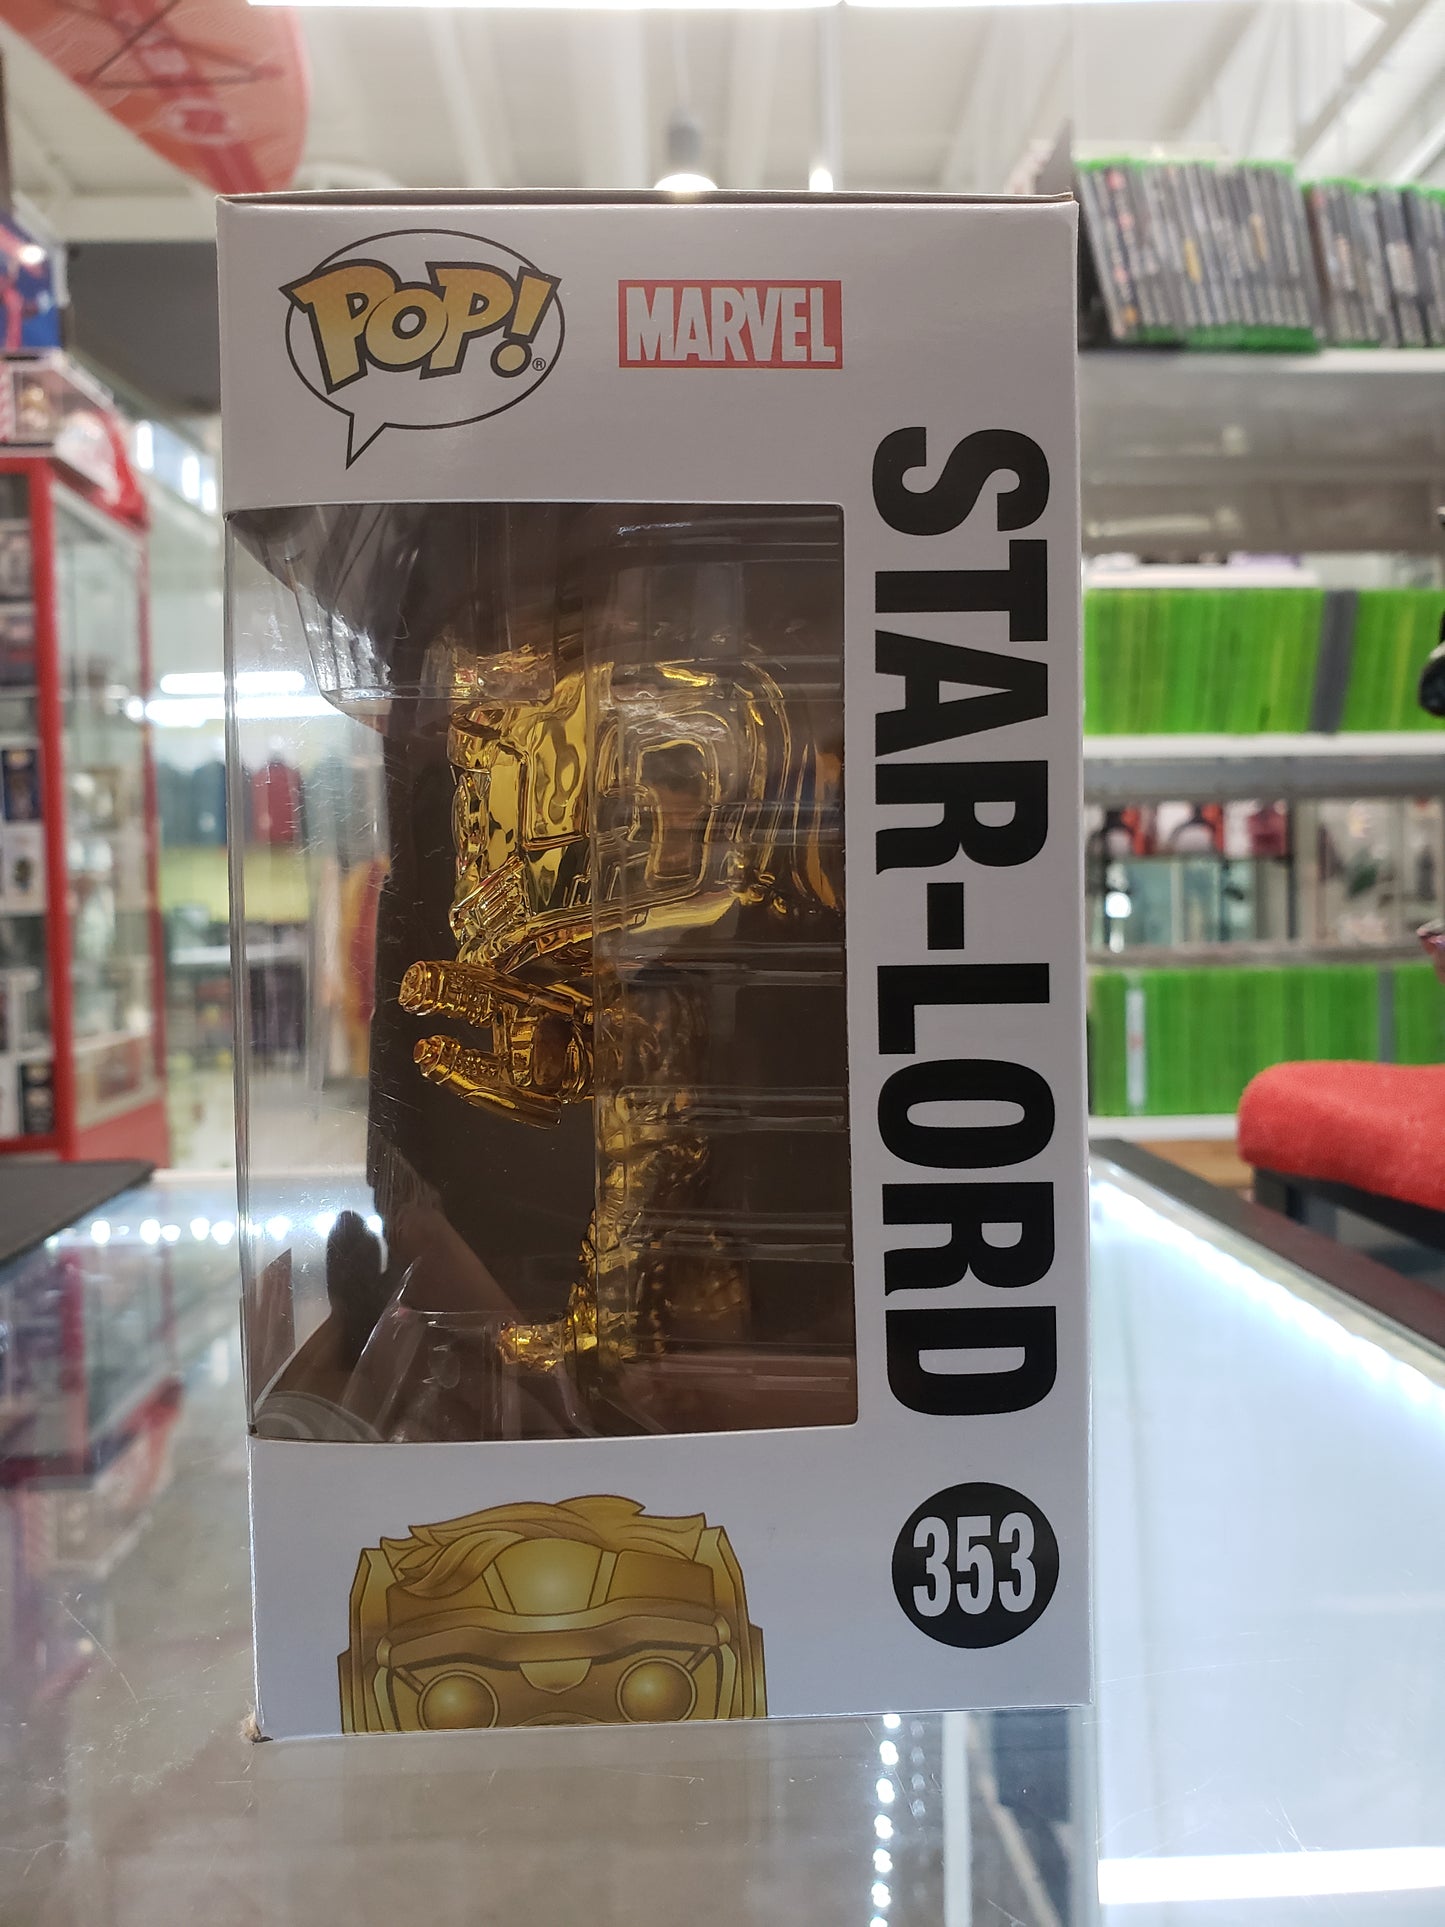 Funko Pop! Marvel Studios The First Ten Years: Star-Lord (BOX LUNCH EXCLUSIVE)